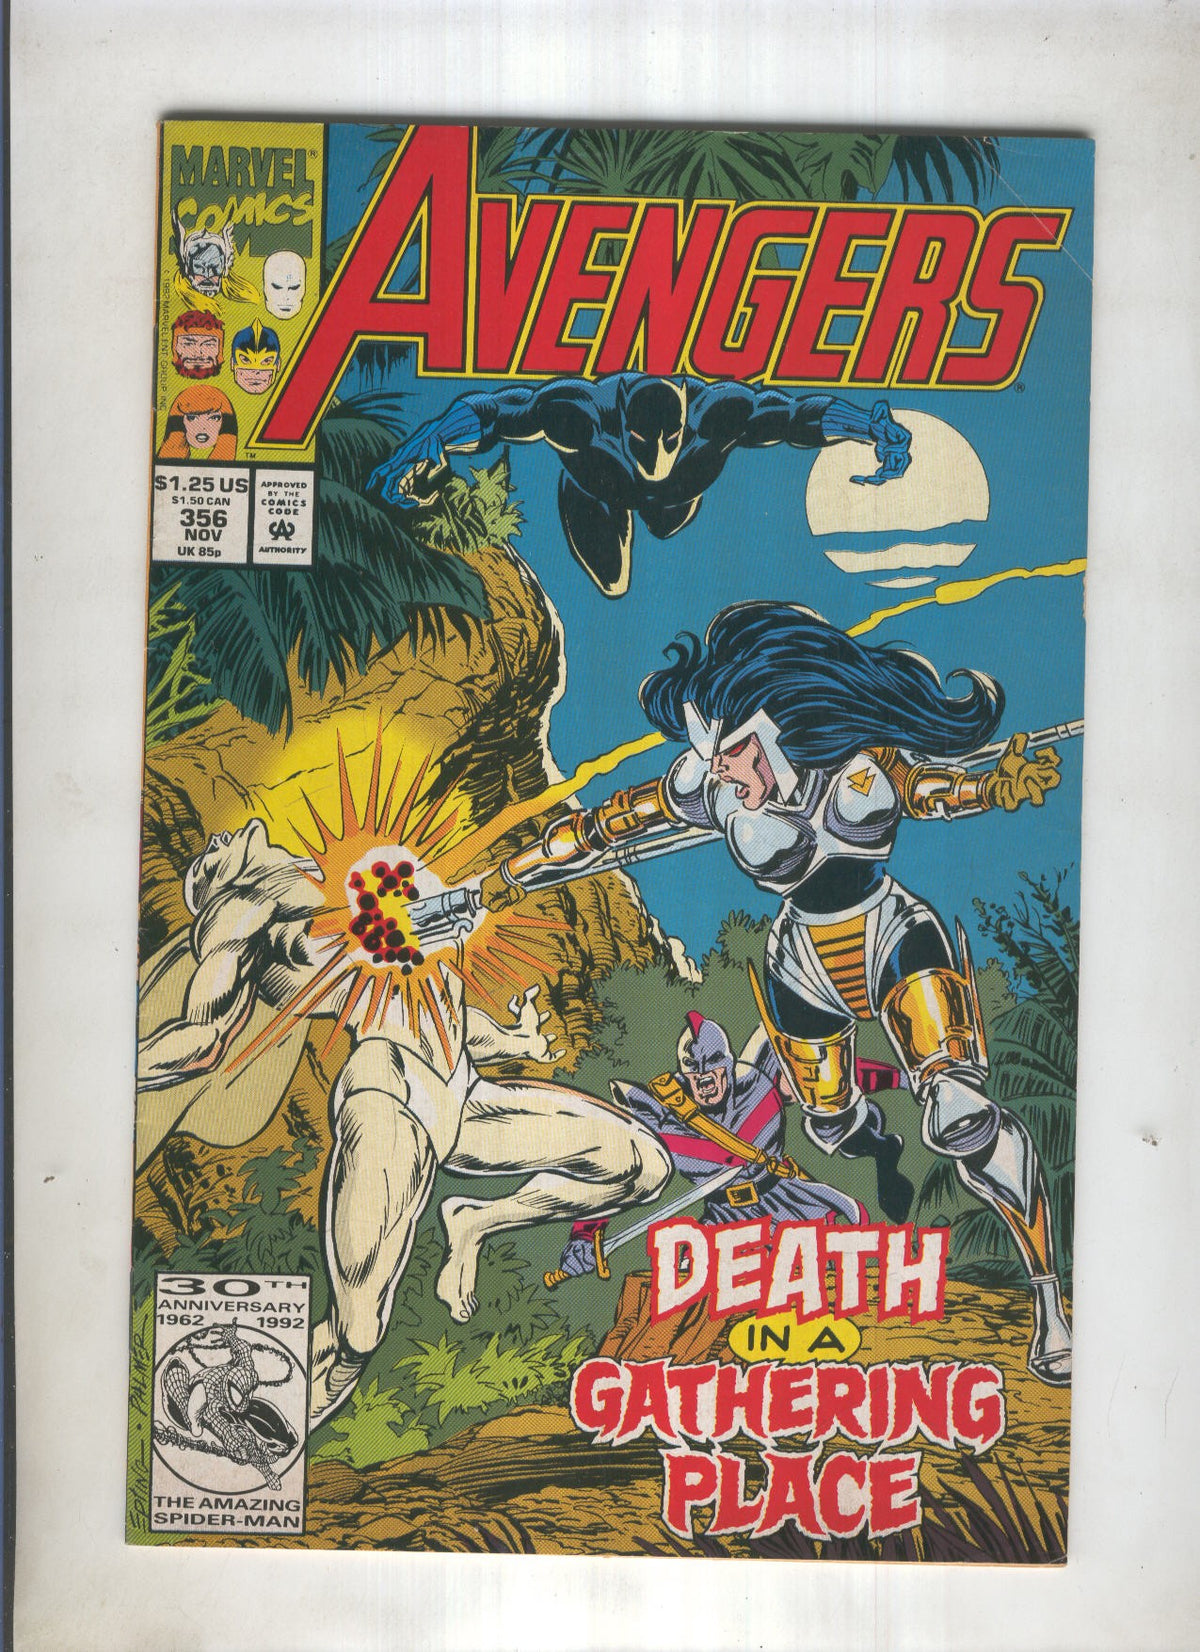 AVENGERS Vol1 numero 356: Death in a gathering place